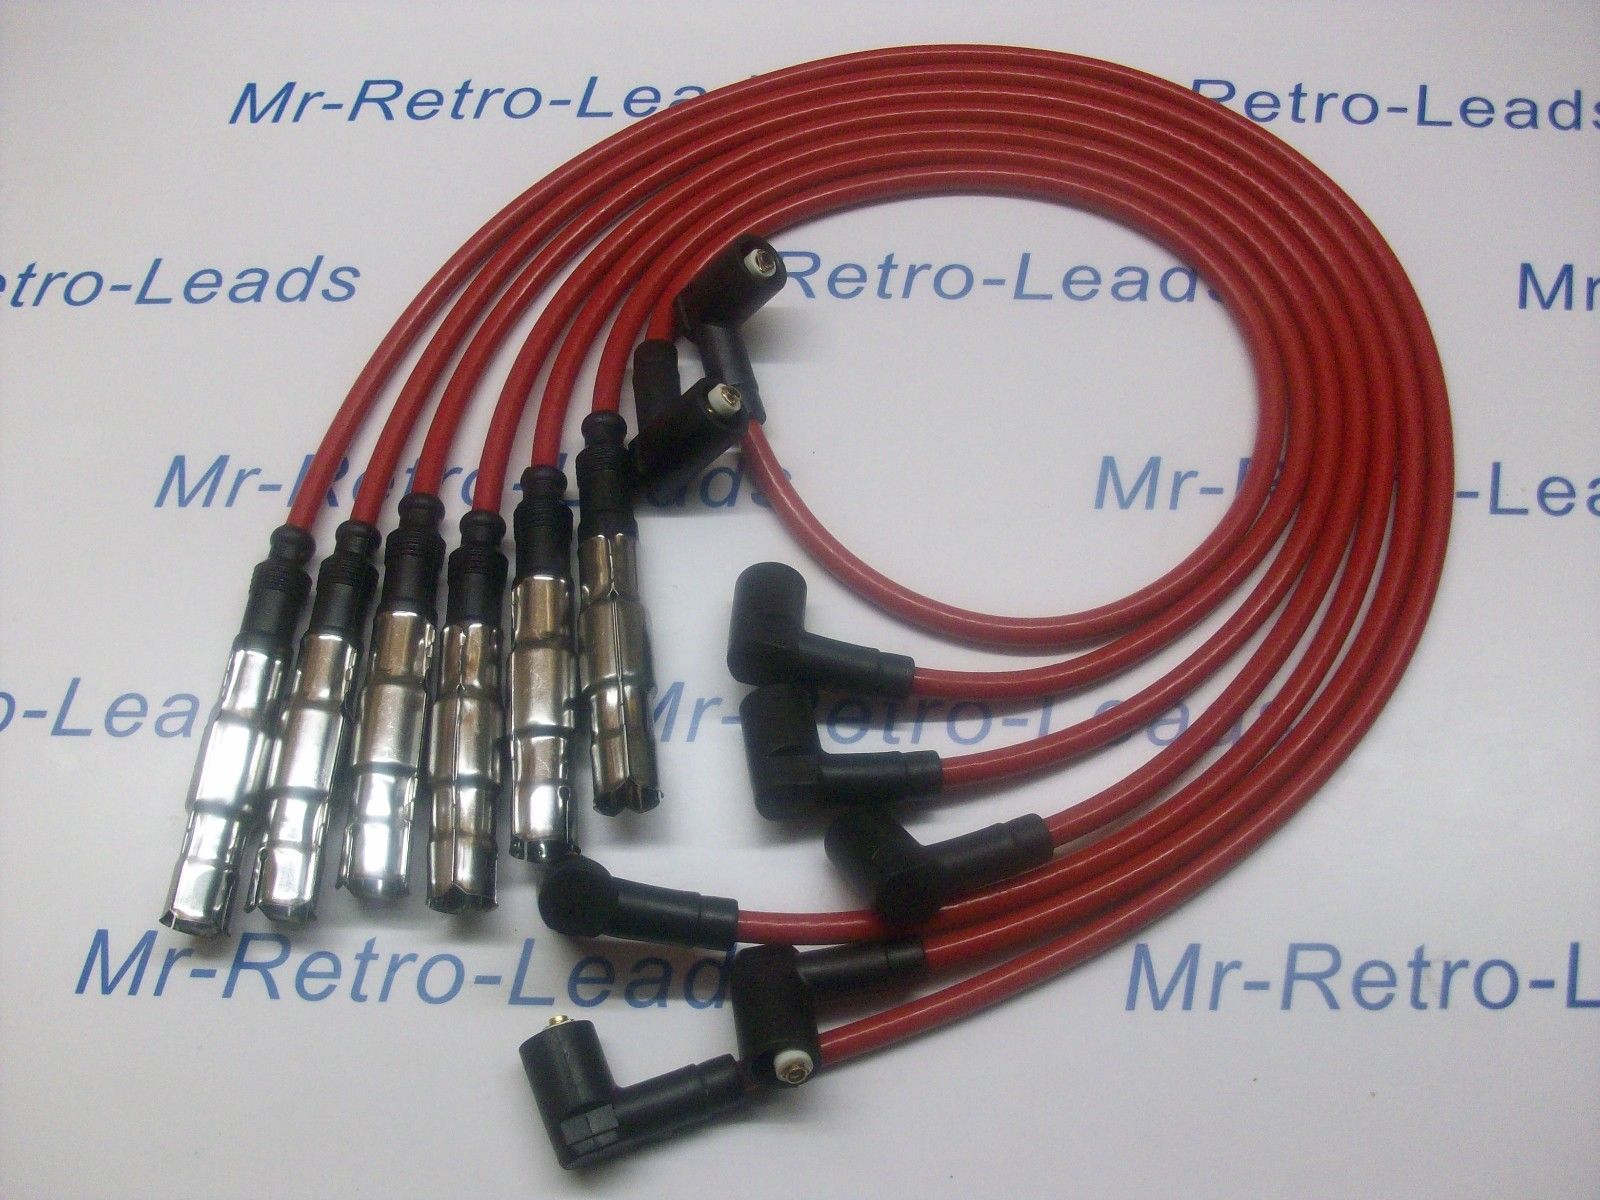 RED 8.5MM PERFORMANCE IGNITION LEADS VR6 OBD1 CORRADO VR6 PASSAT QUALITY LEADS